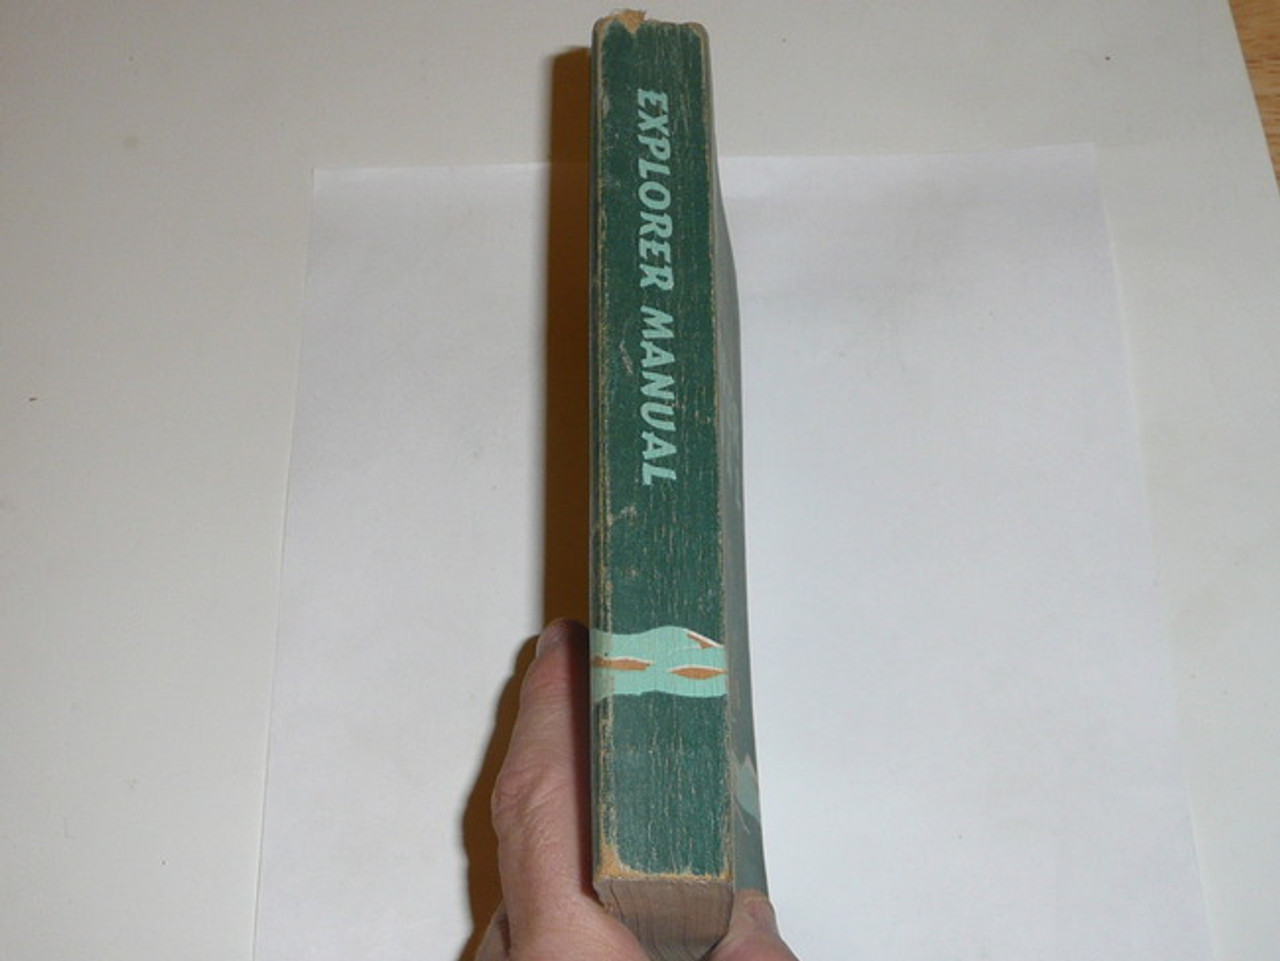 1957 Explorer Scout Manual, First Edition, 1957 Printing, used